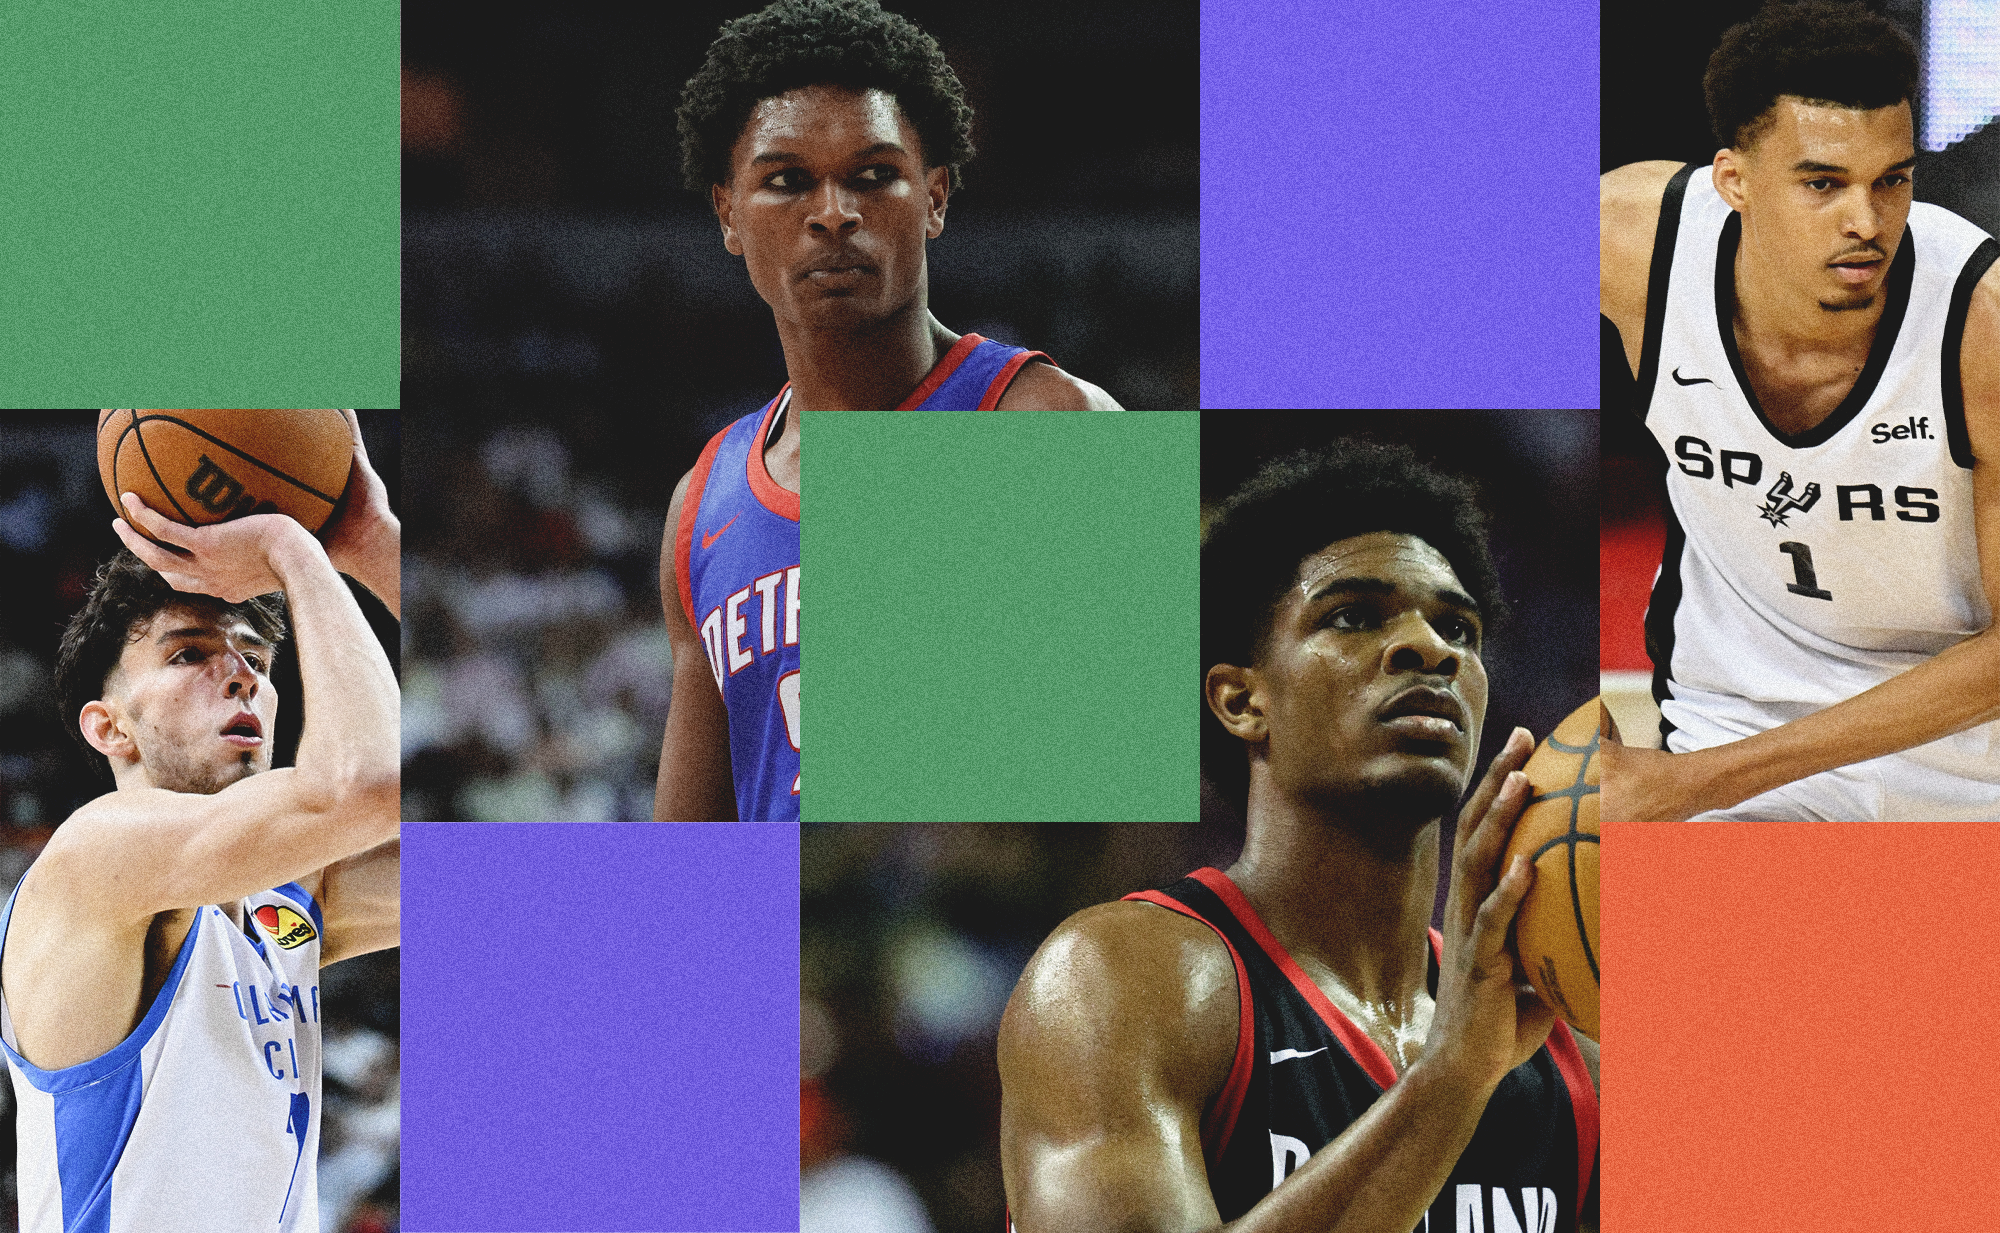 7 G-League players that could help Portland make a playoff push